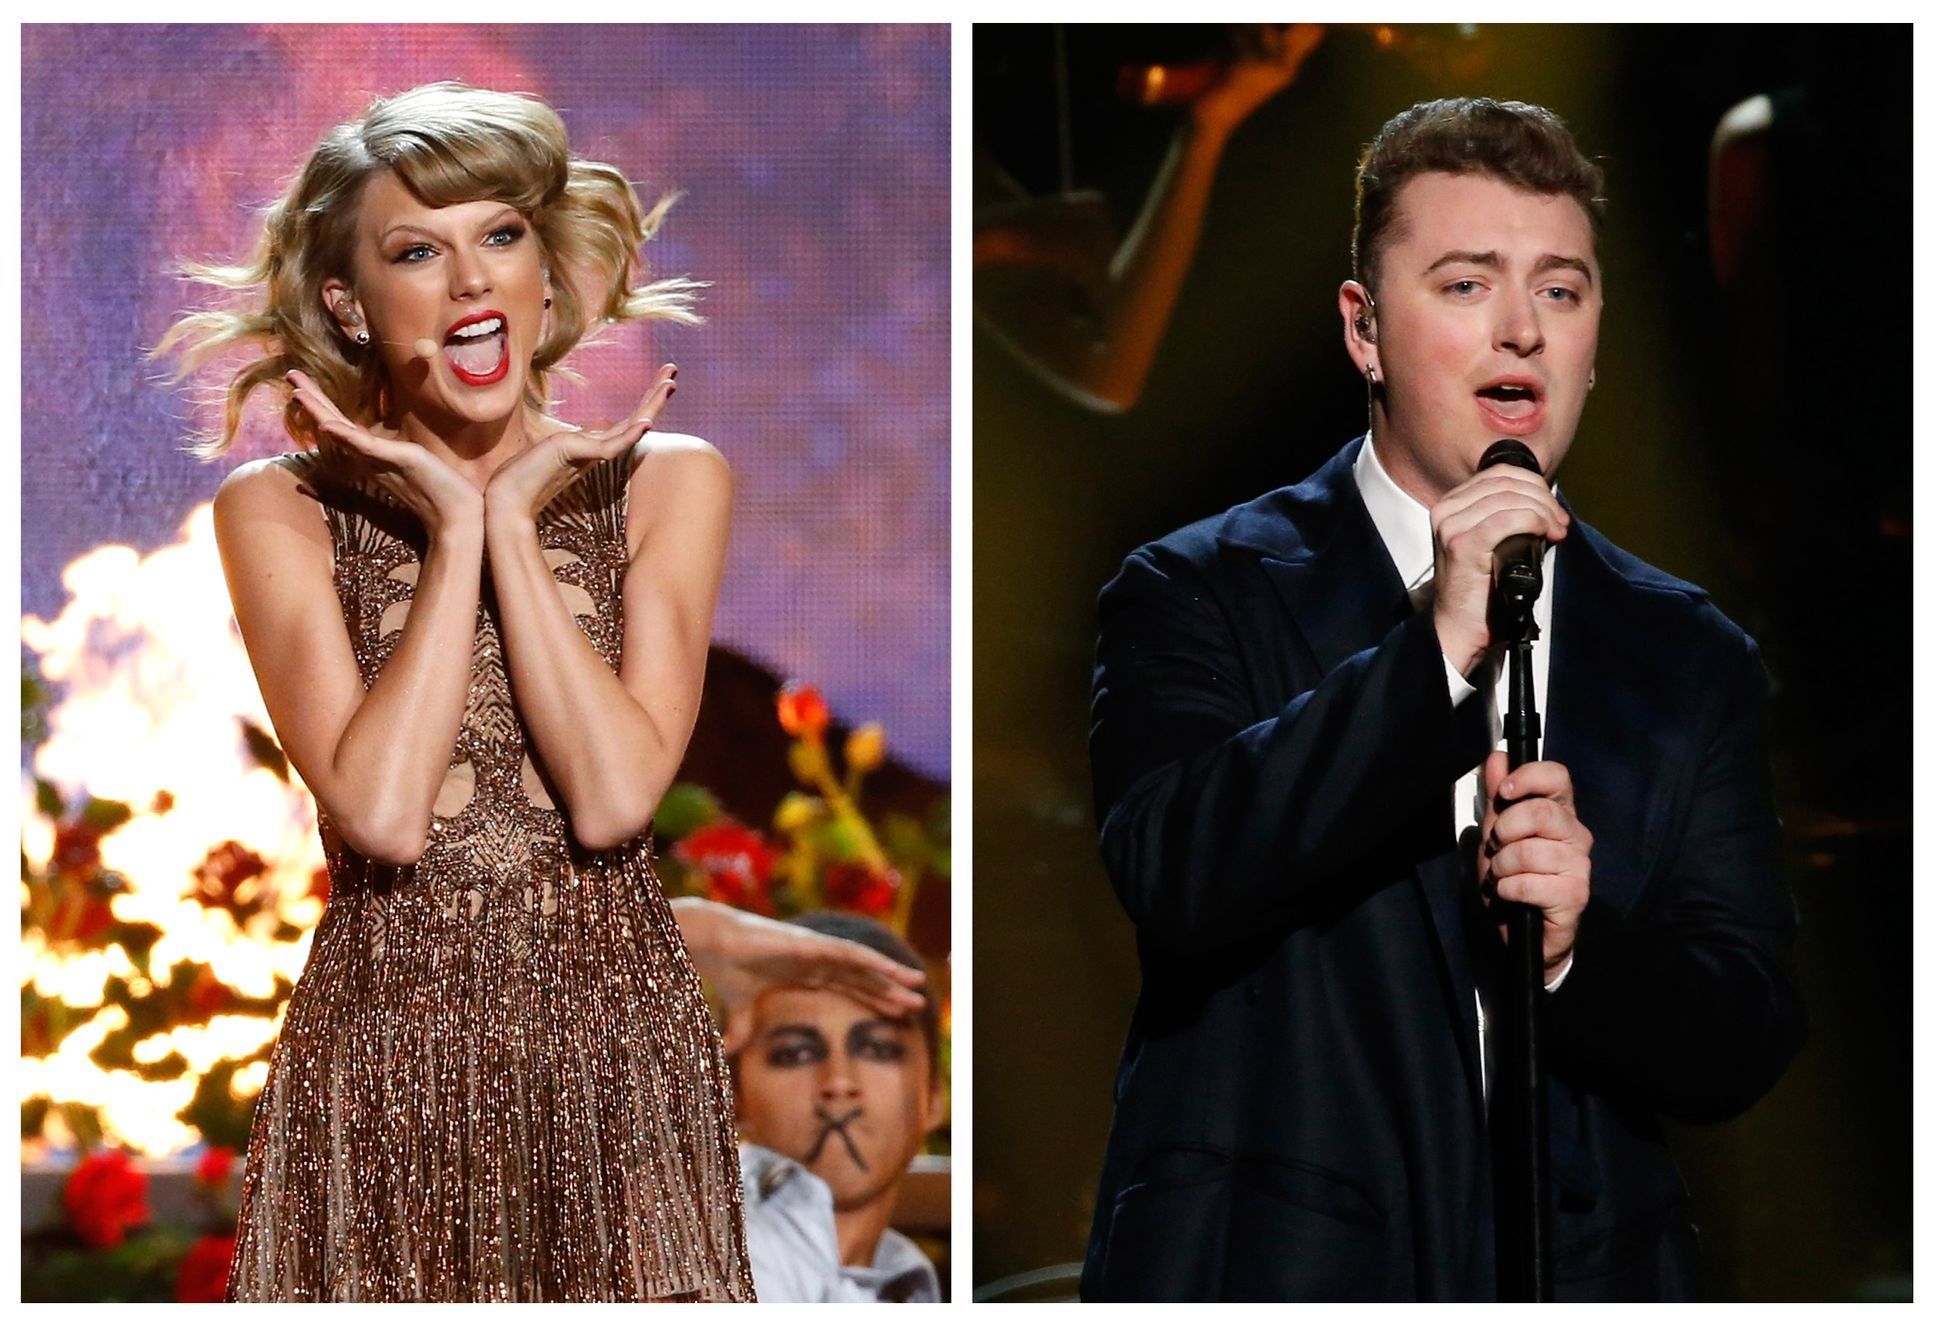 Combination photo shows Grammy nominees Taylor Swift and Sam Smith performing at the 42nd American Music Awards